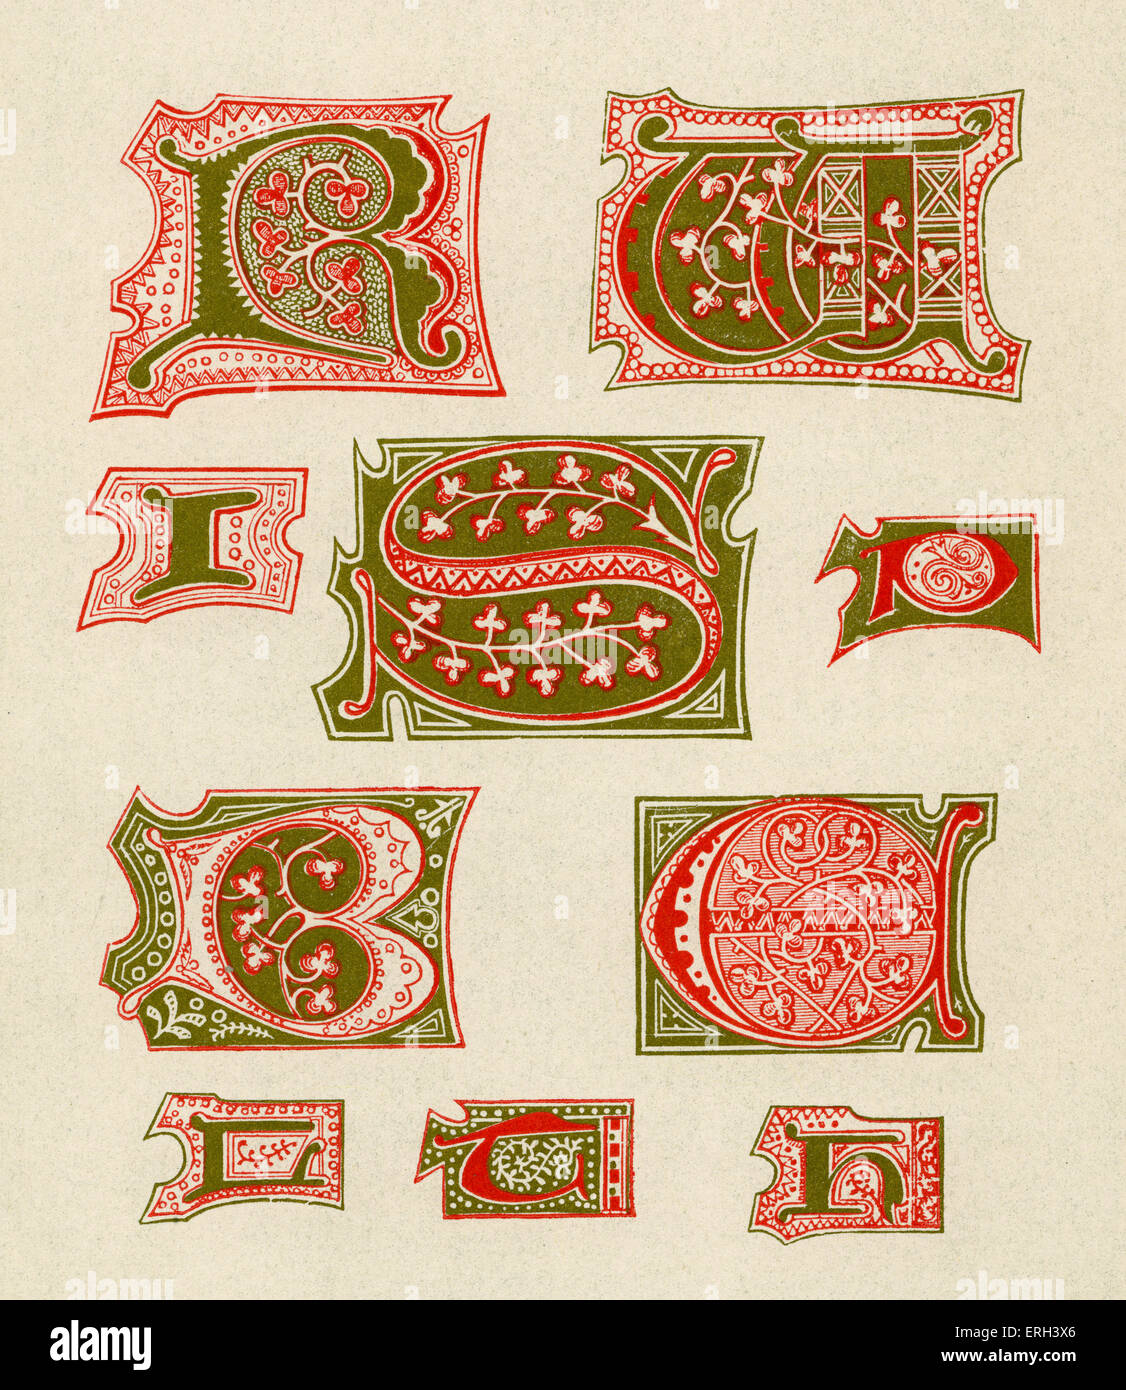 Red and gold illuminated letters R, W, I, S, P, B, C, D, T and H. Sixteenth century. (1886 source). Stock Photo